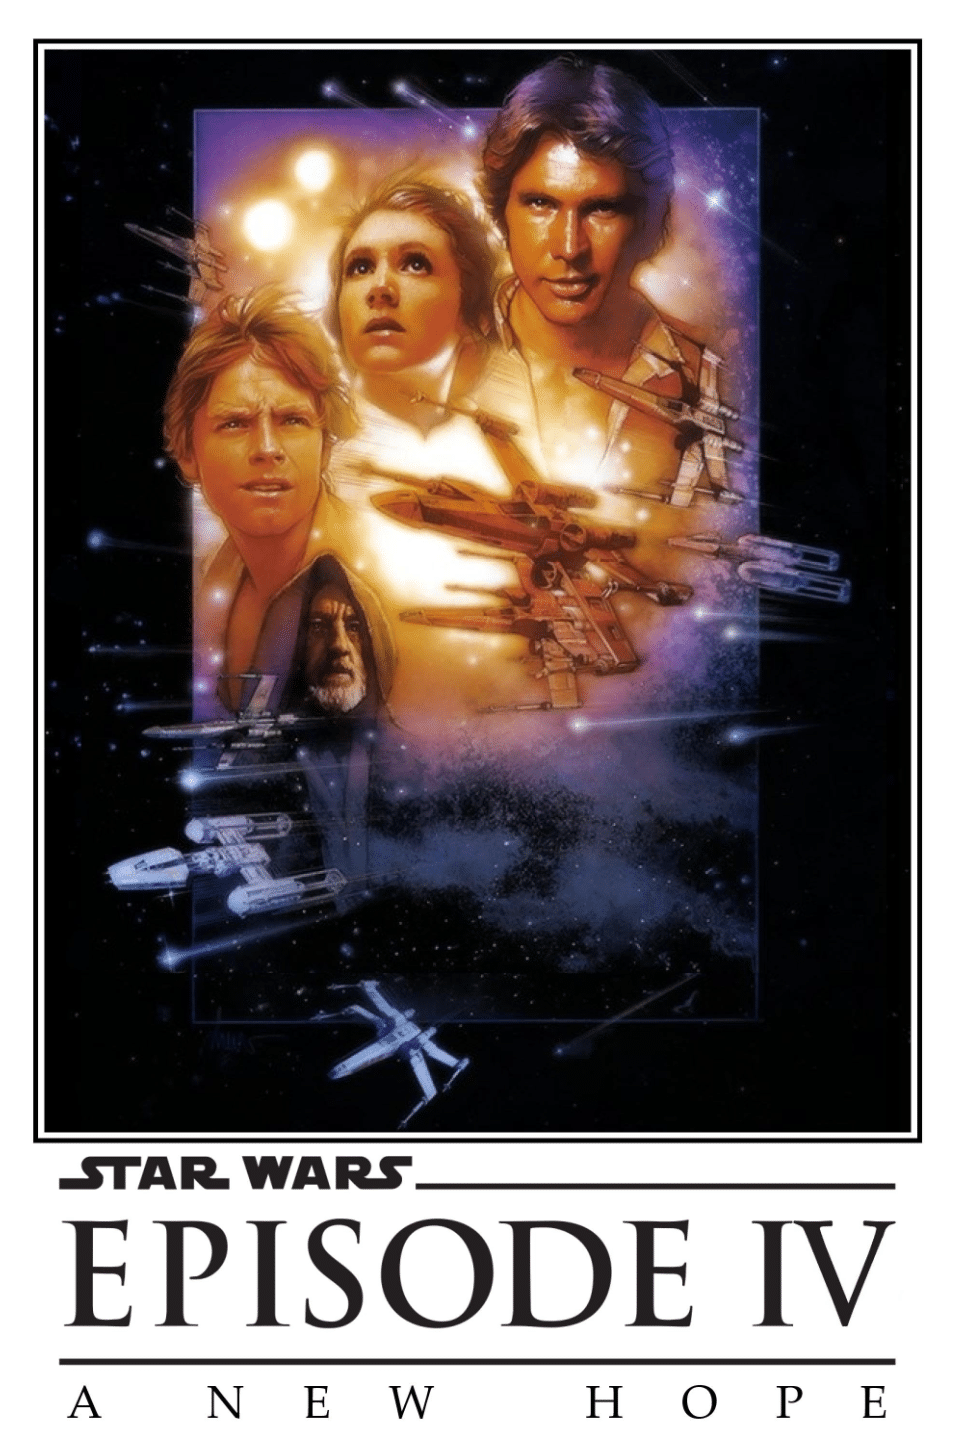 Star Wars A New Hope movie poster Courtesy of IMBD